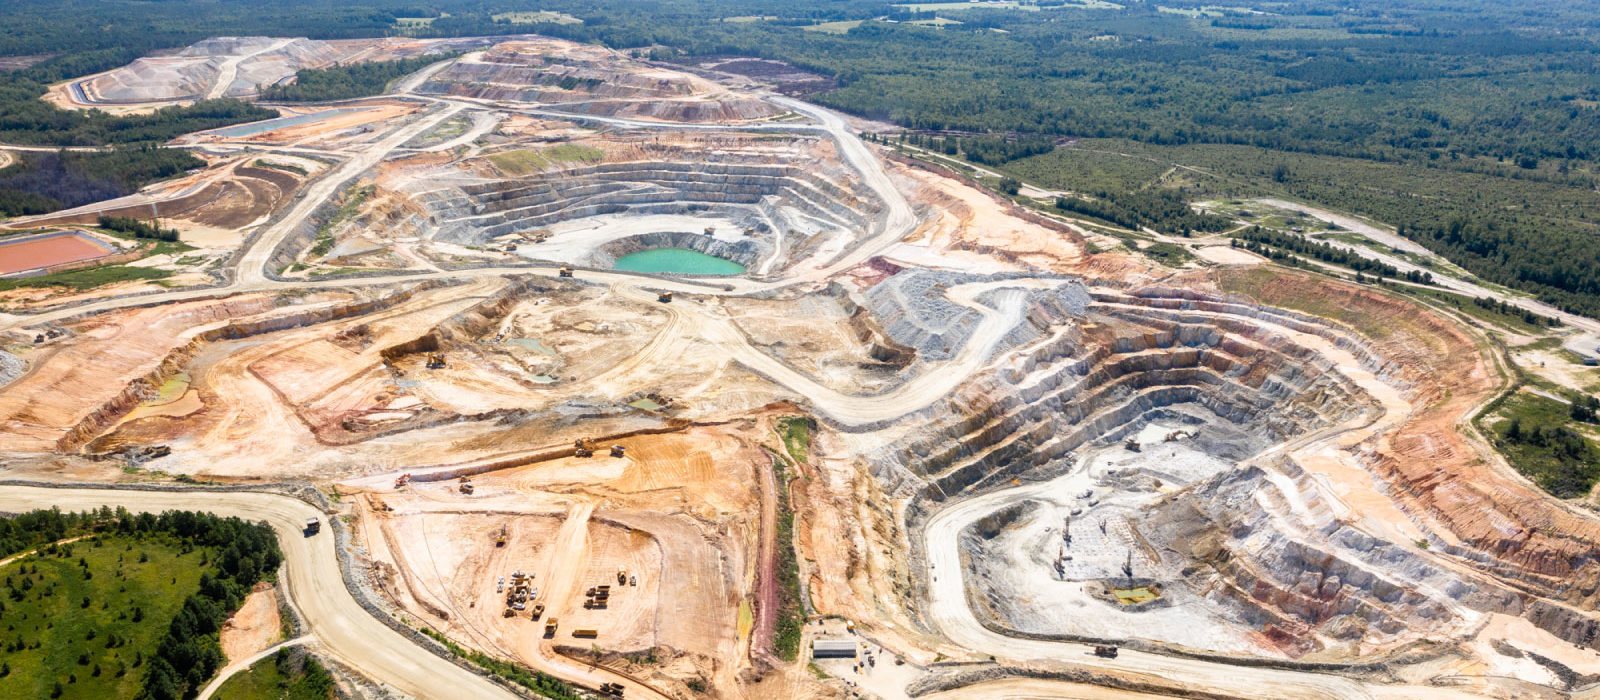 Aerial View Of A Mining Job Site